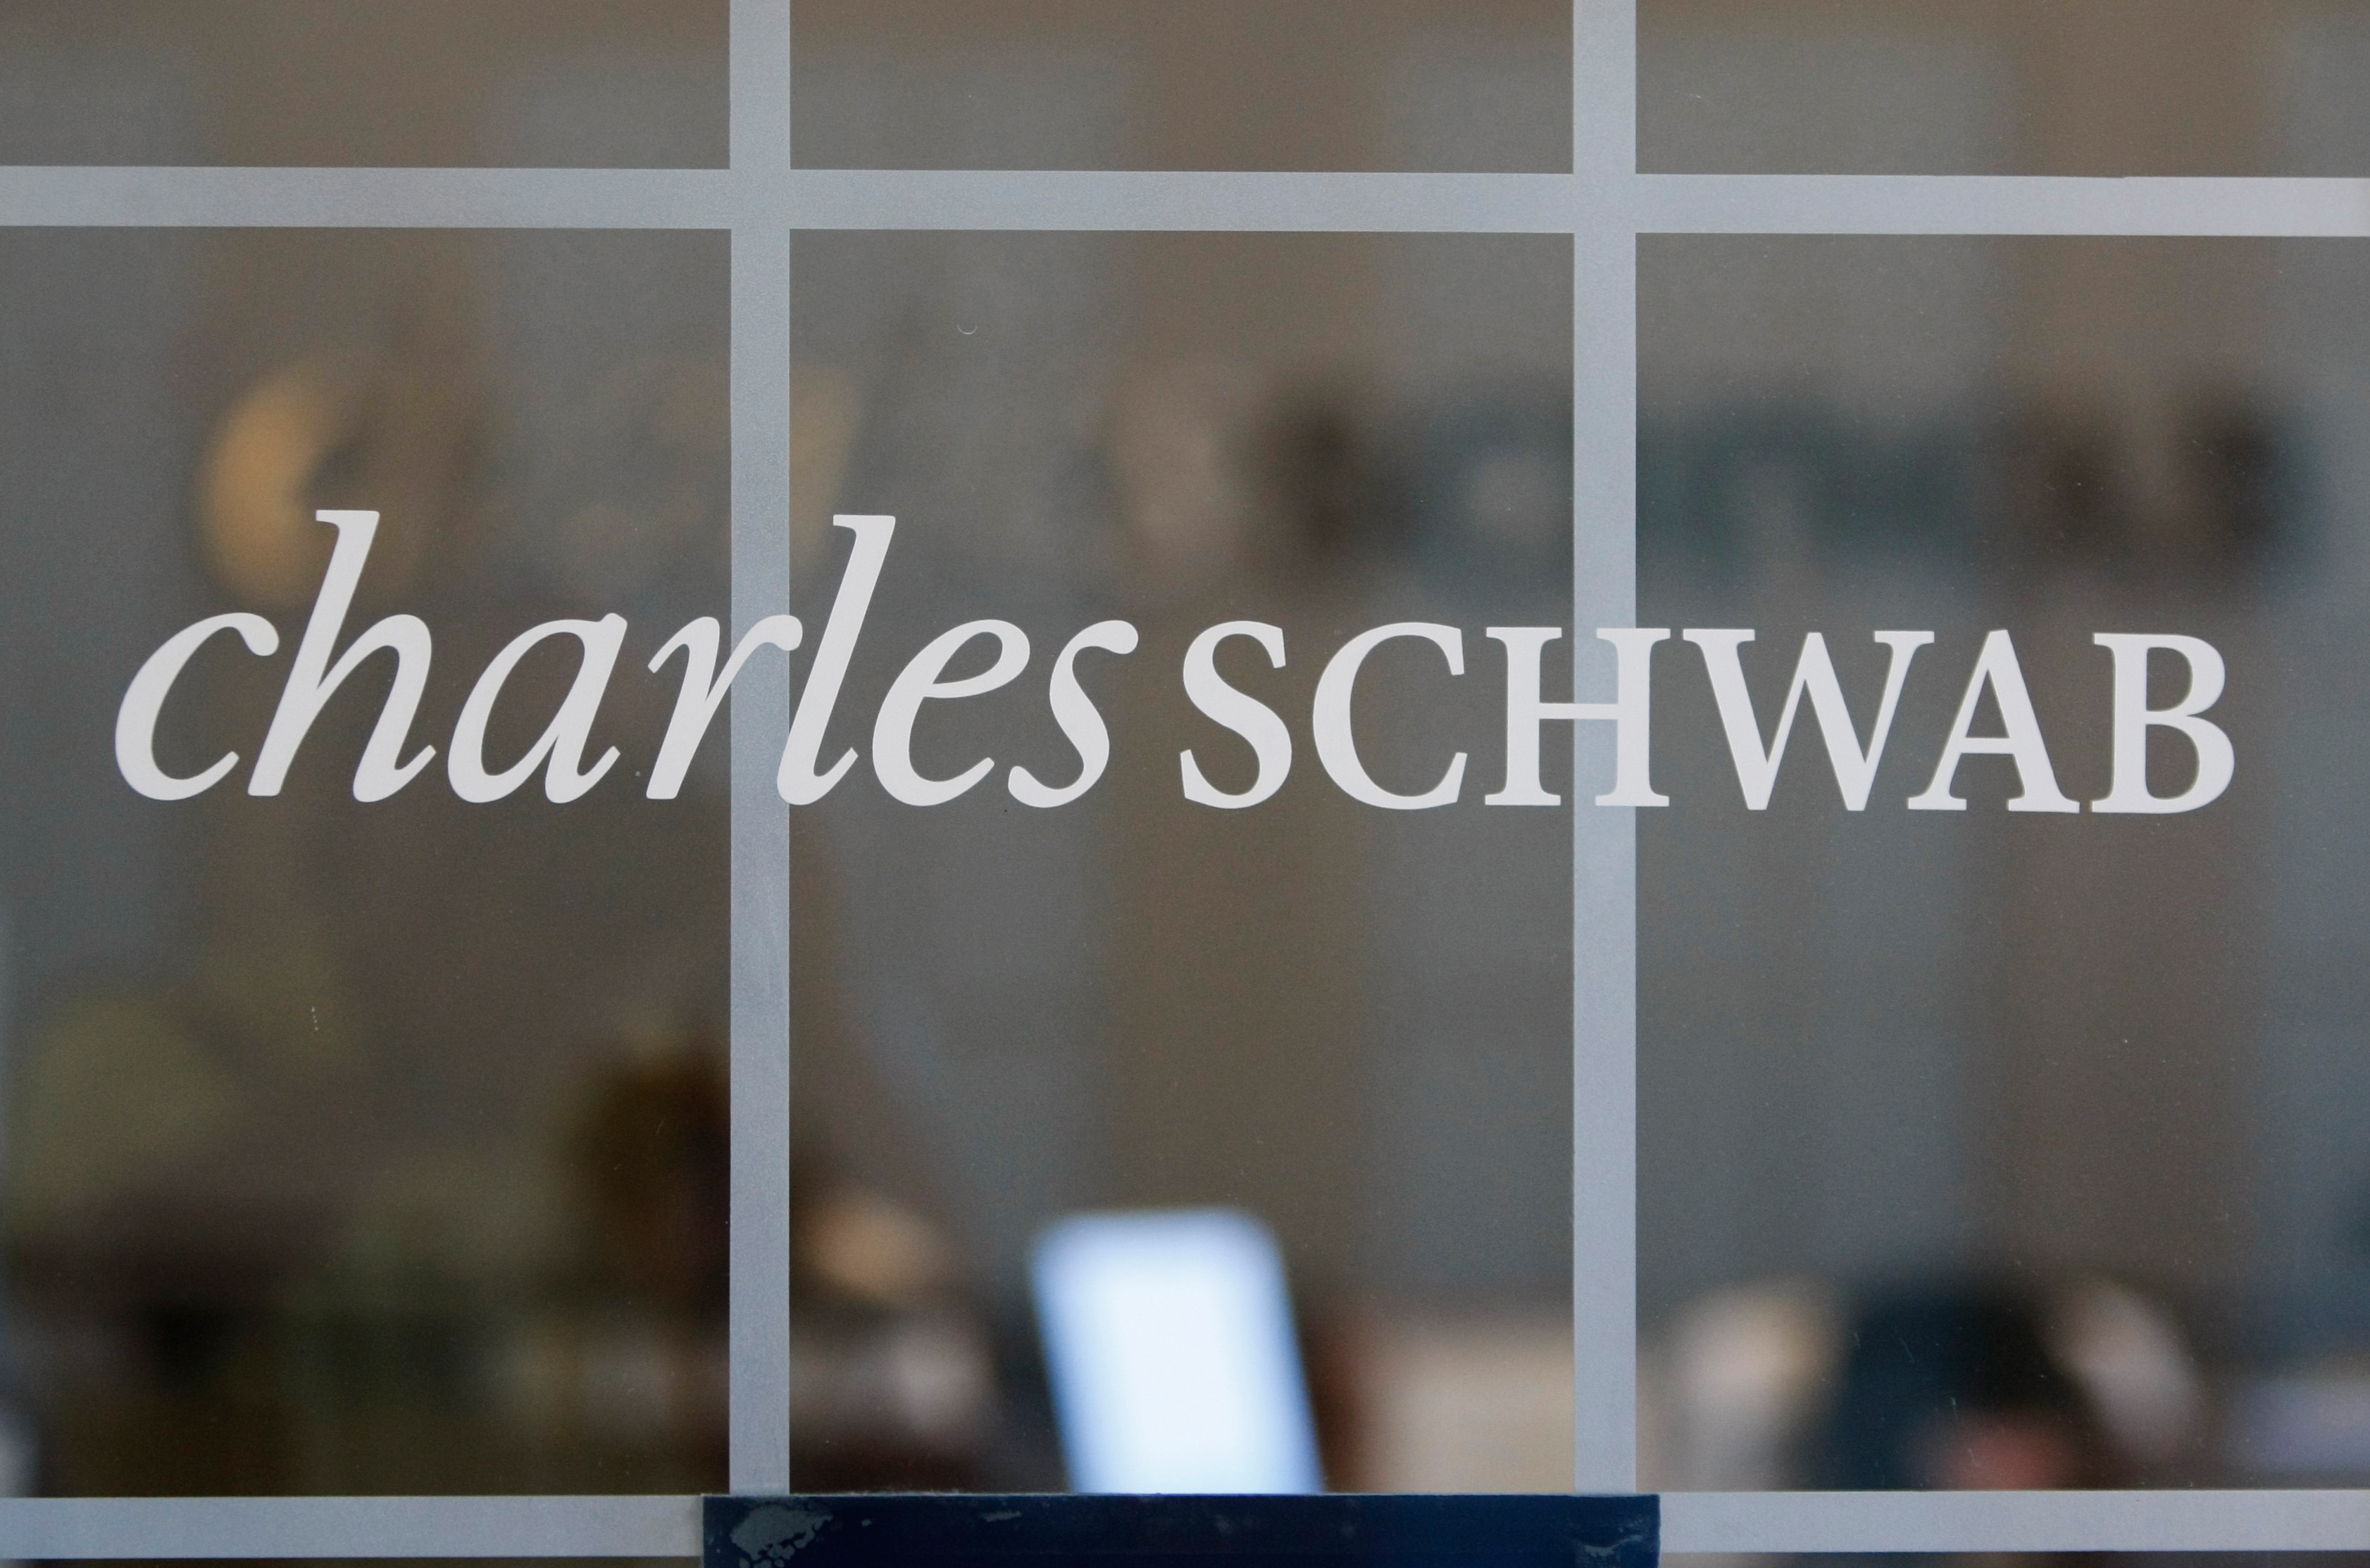 What Every Investor Should Know About Schwab's "Free" New Advice Service